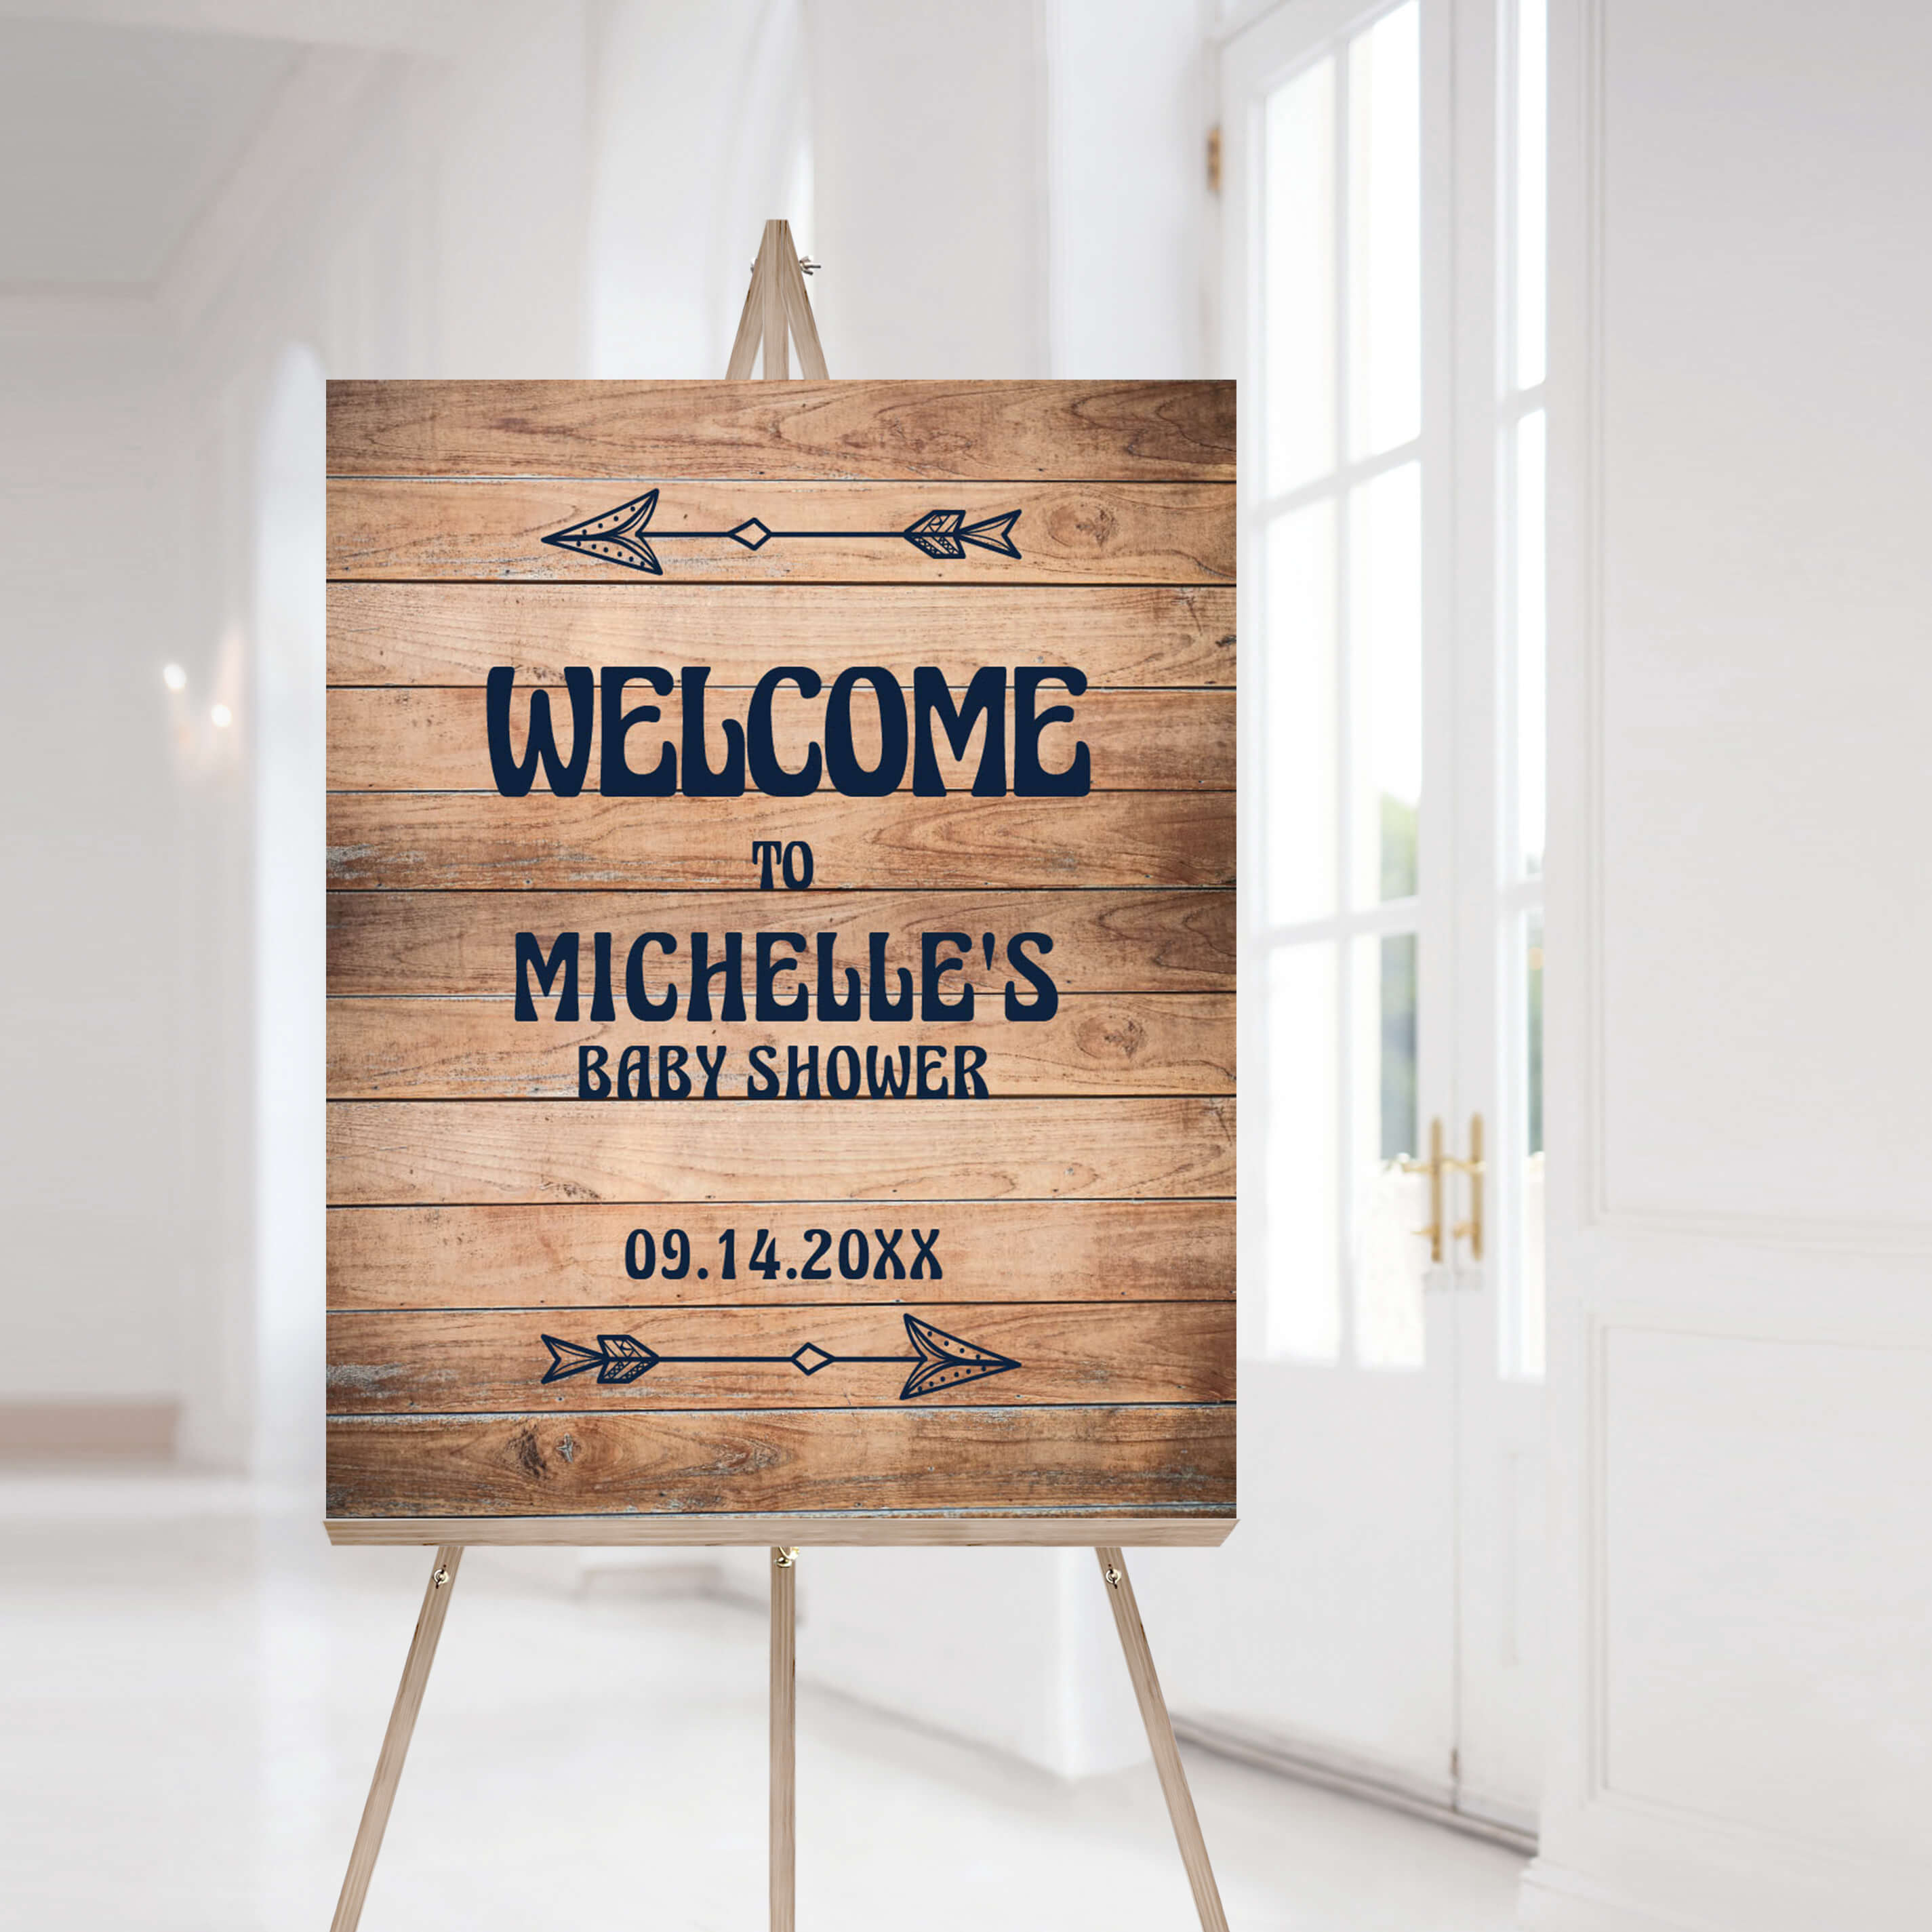 Rustic Baby Shower Welcome Sign Template by LittleSizzle